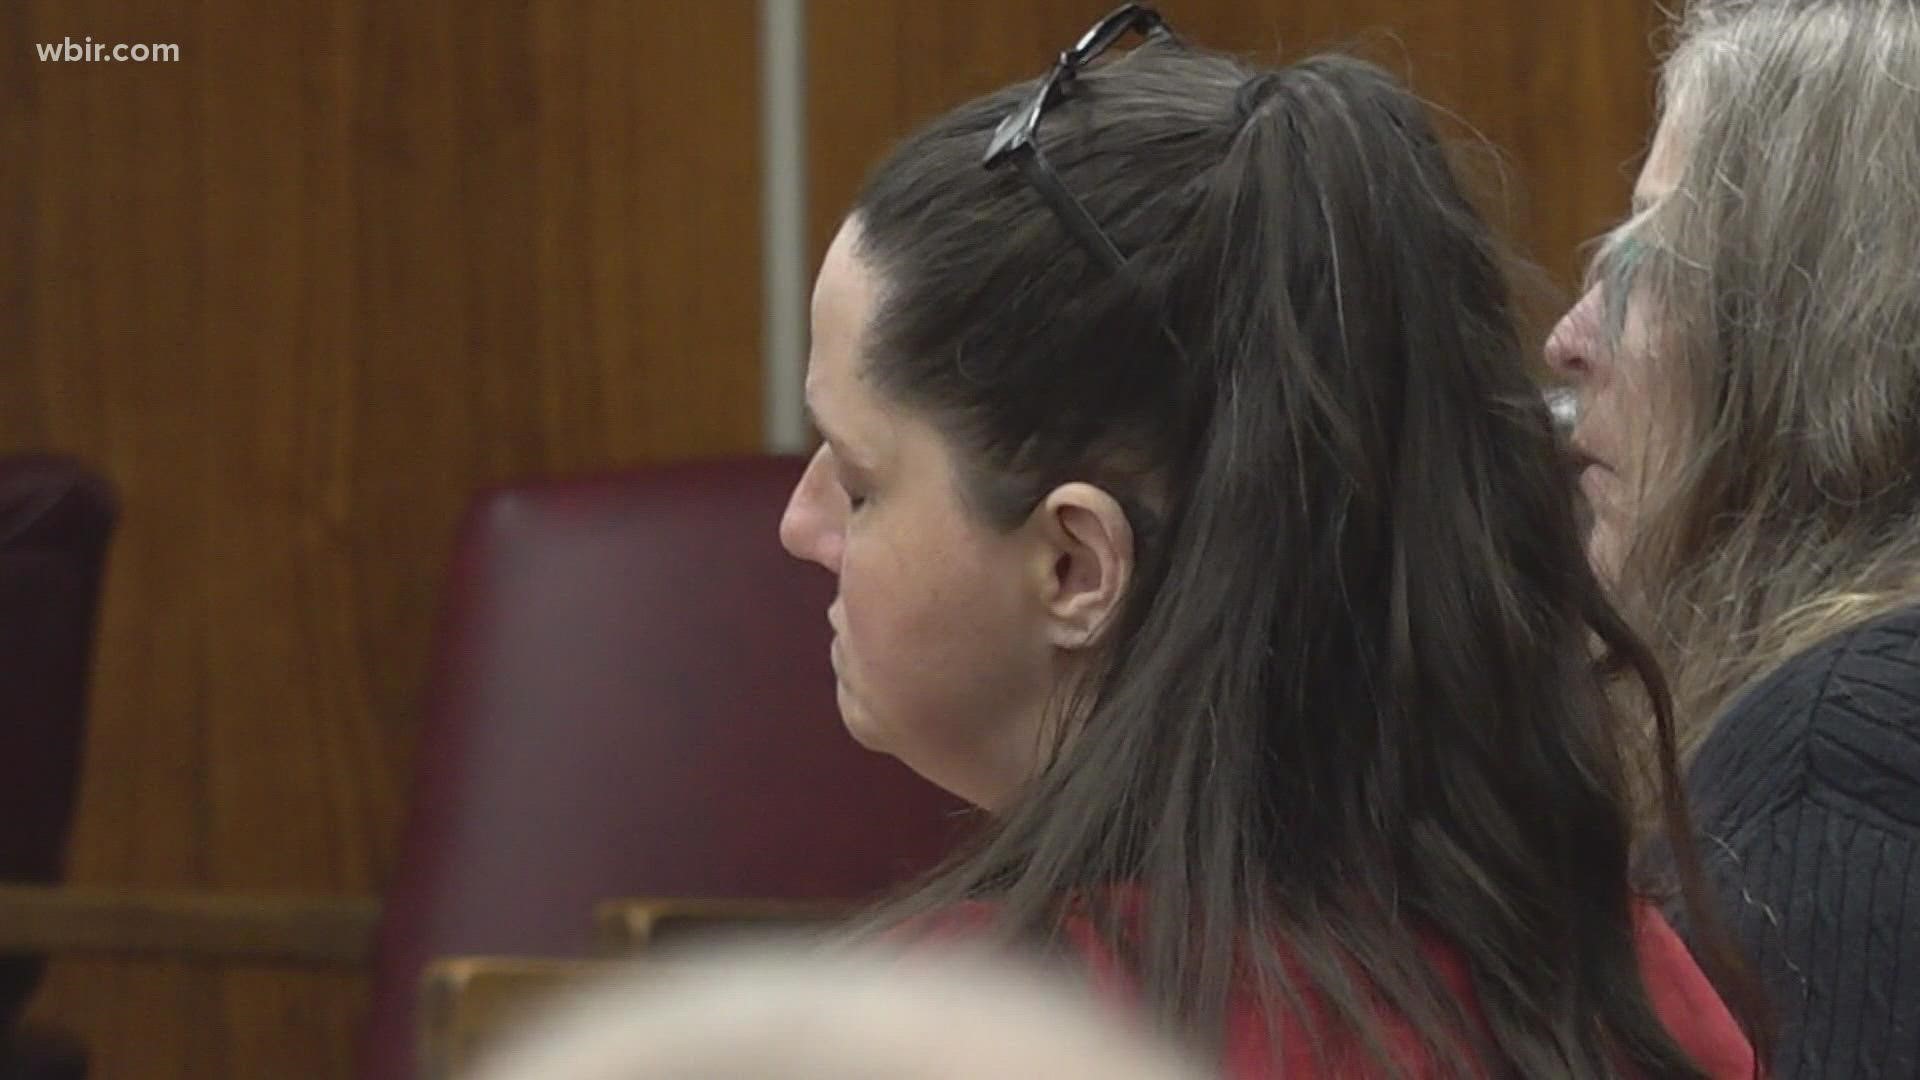 A judge sentenced Christy Comer to life in prison with parole for murder plus another 20 years for aggravated robbery in the 2018 death of J.C. Copeland.